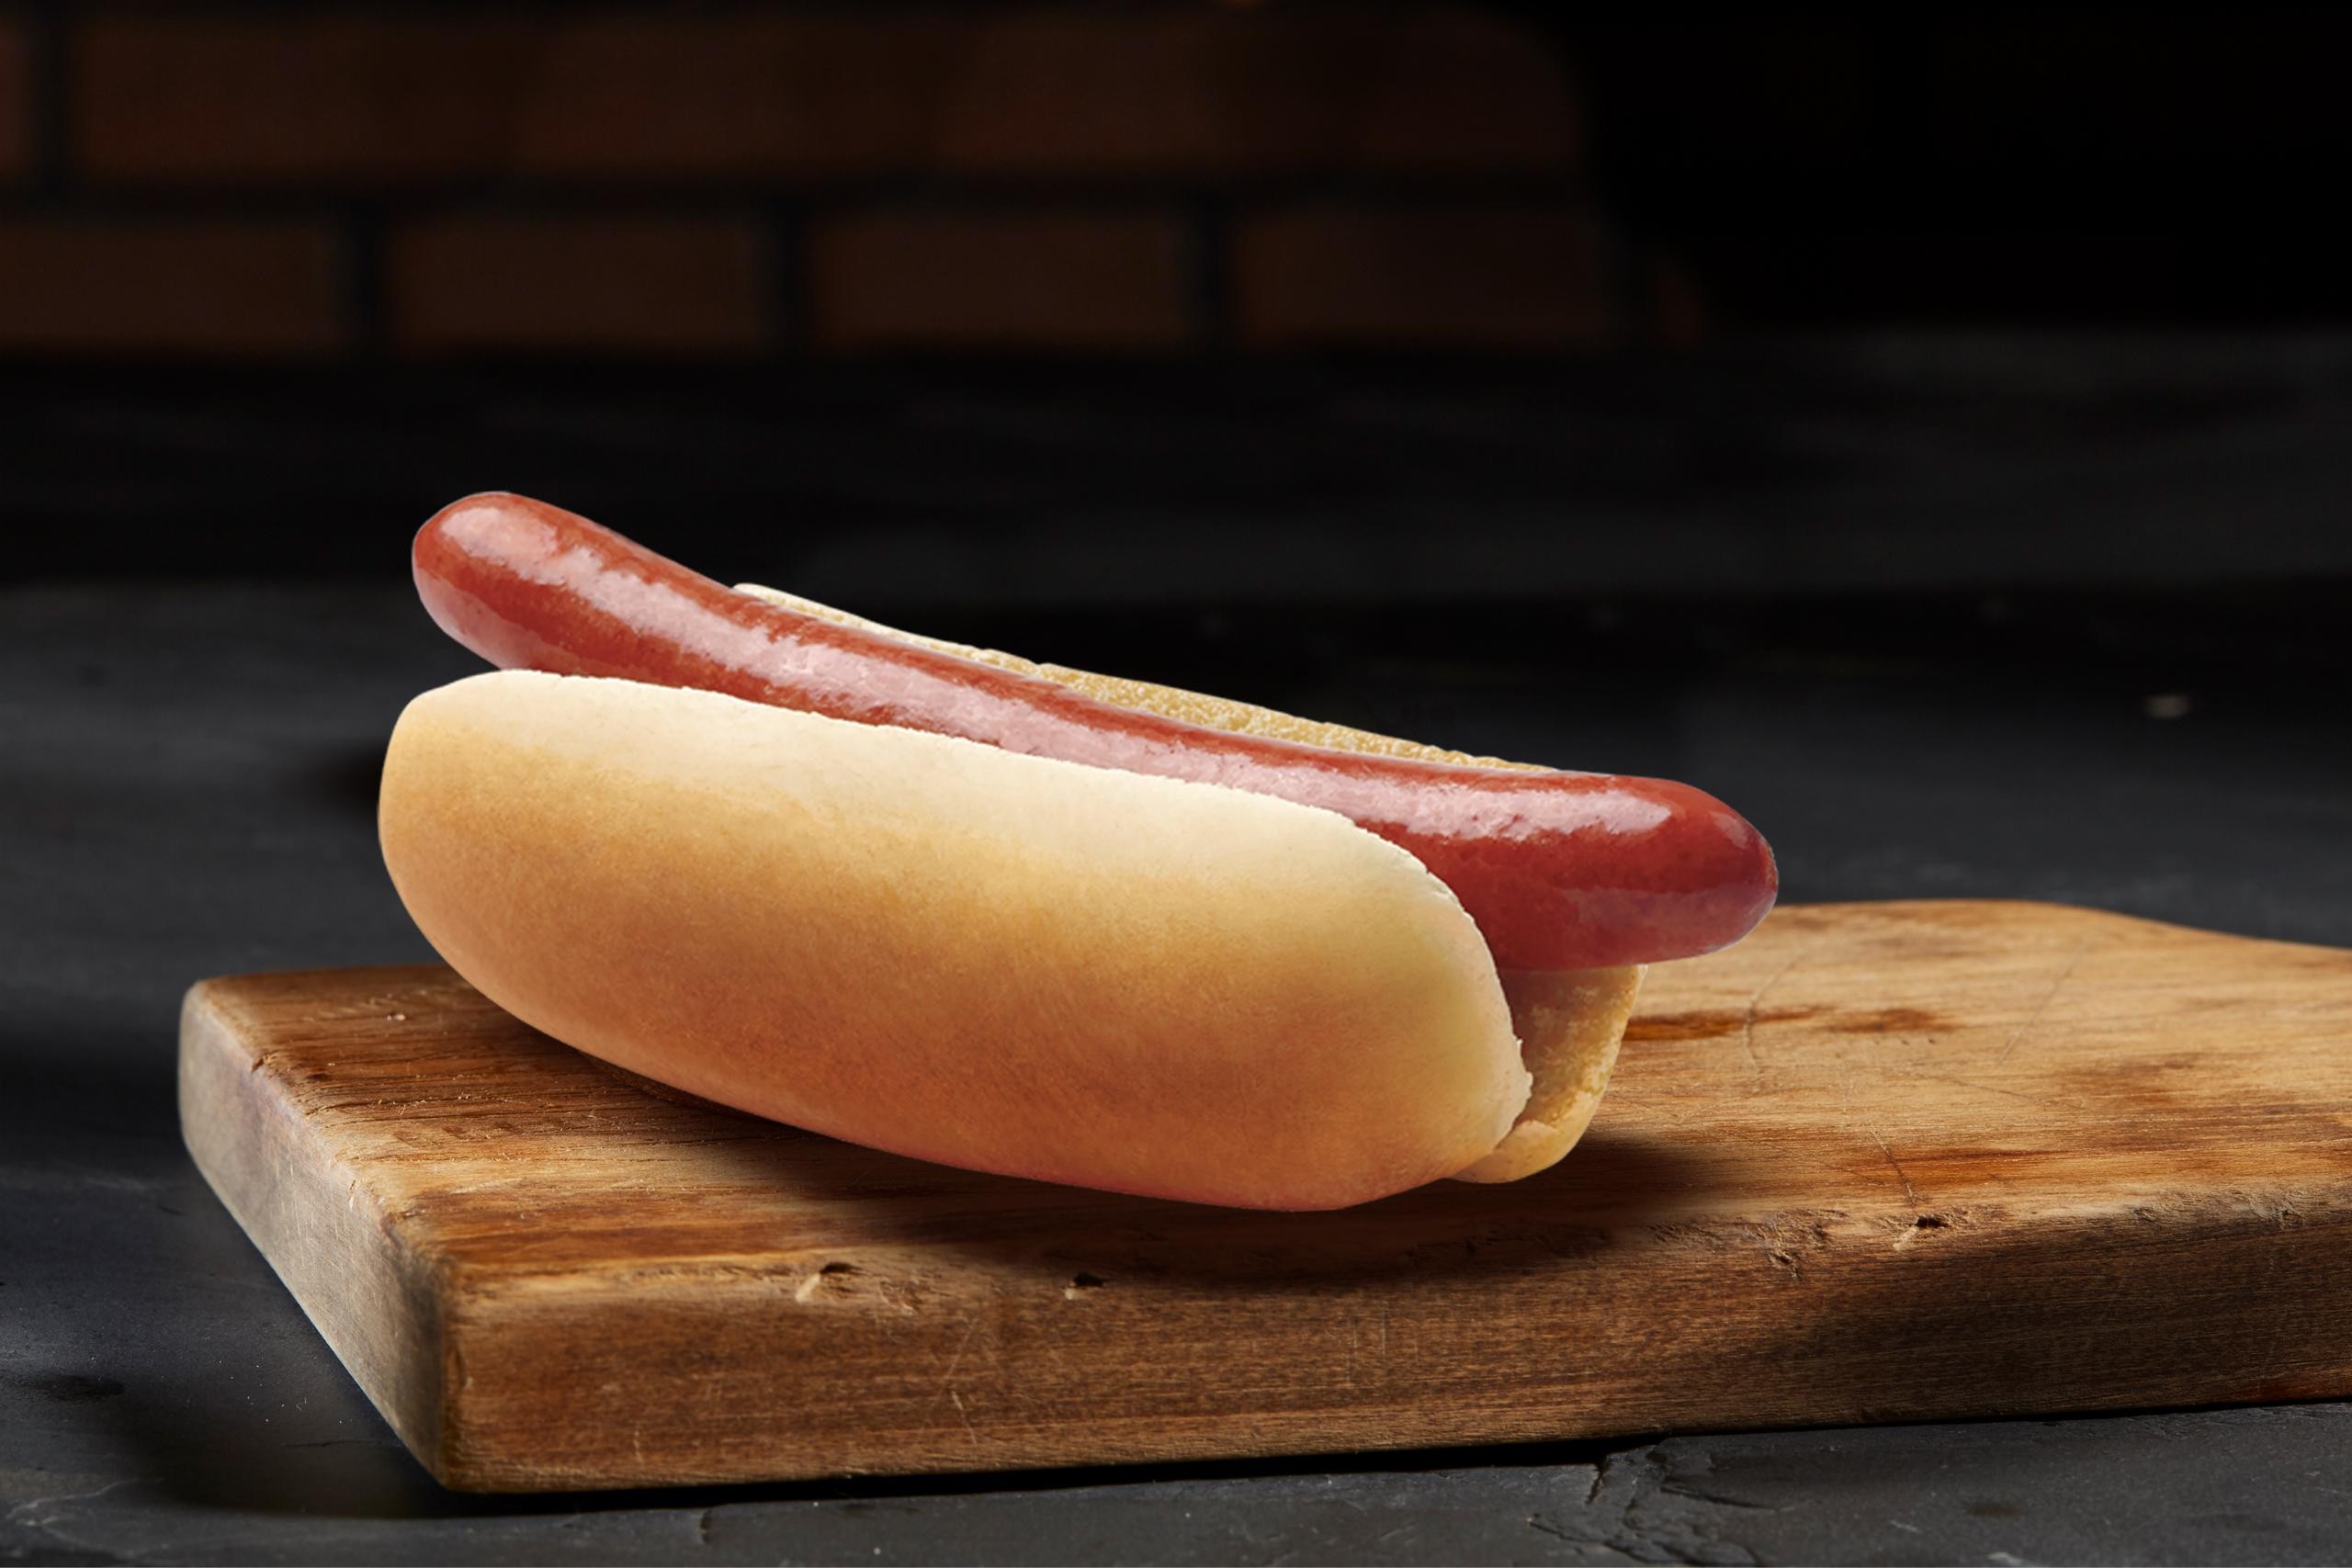 The Original All Beef Hot Dog